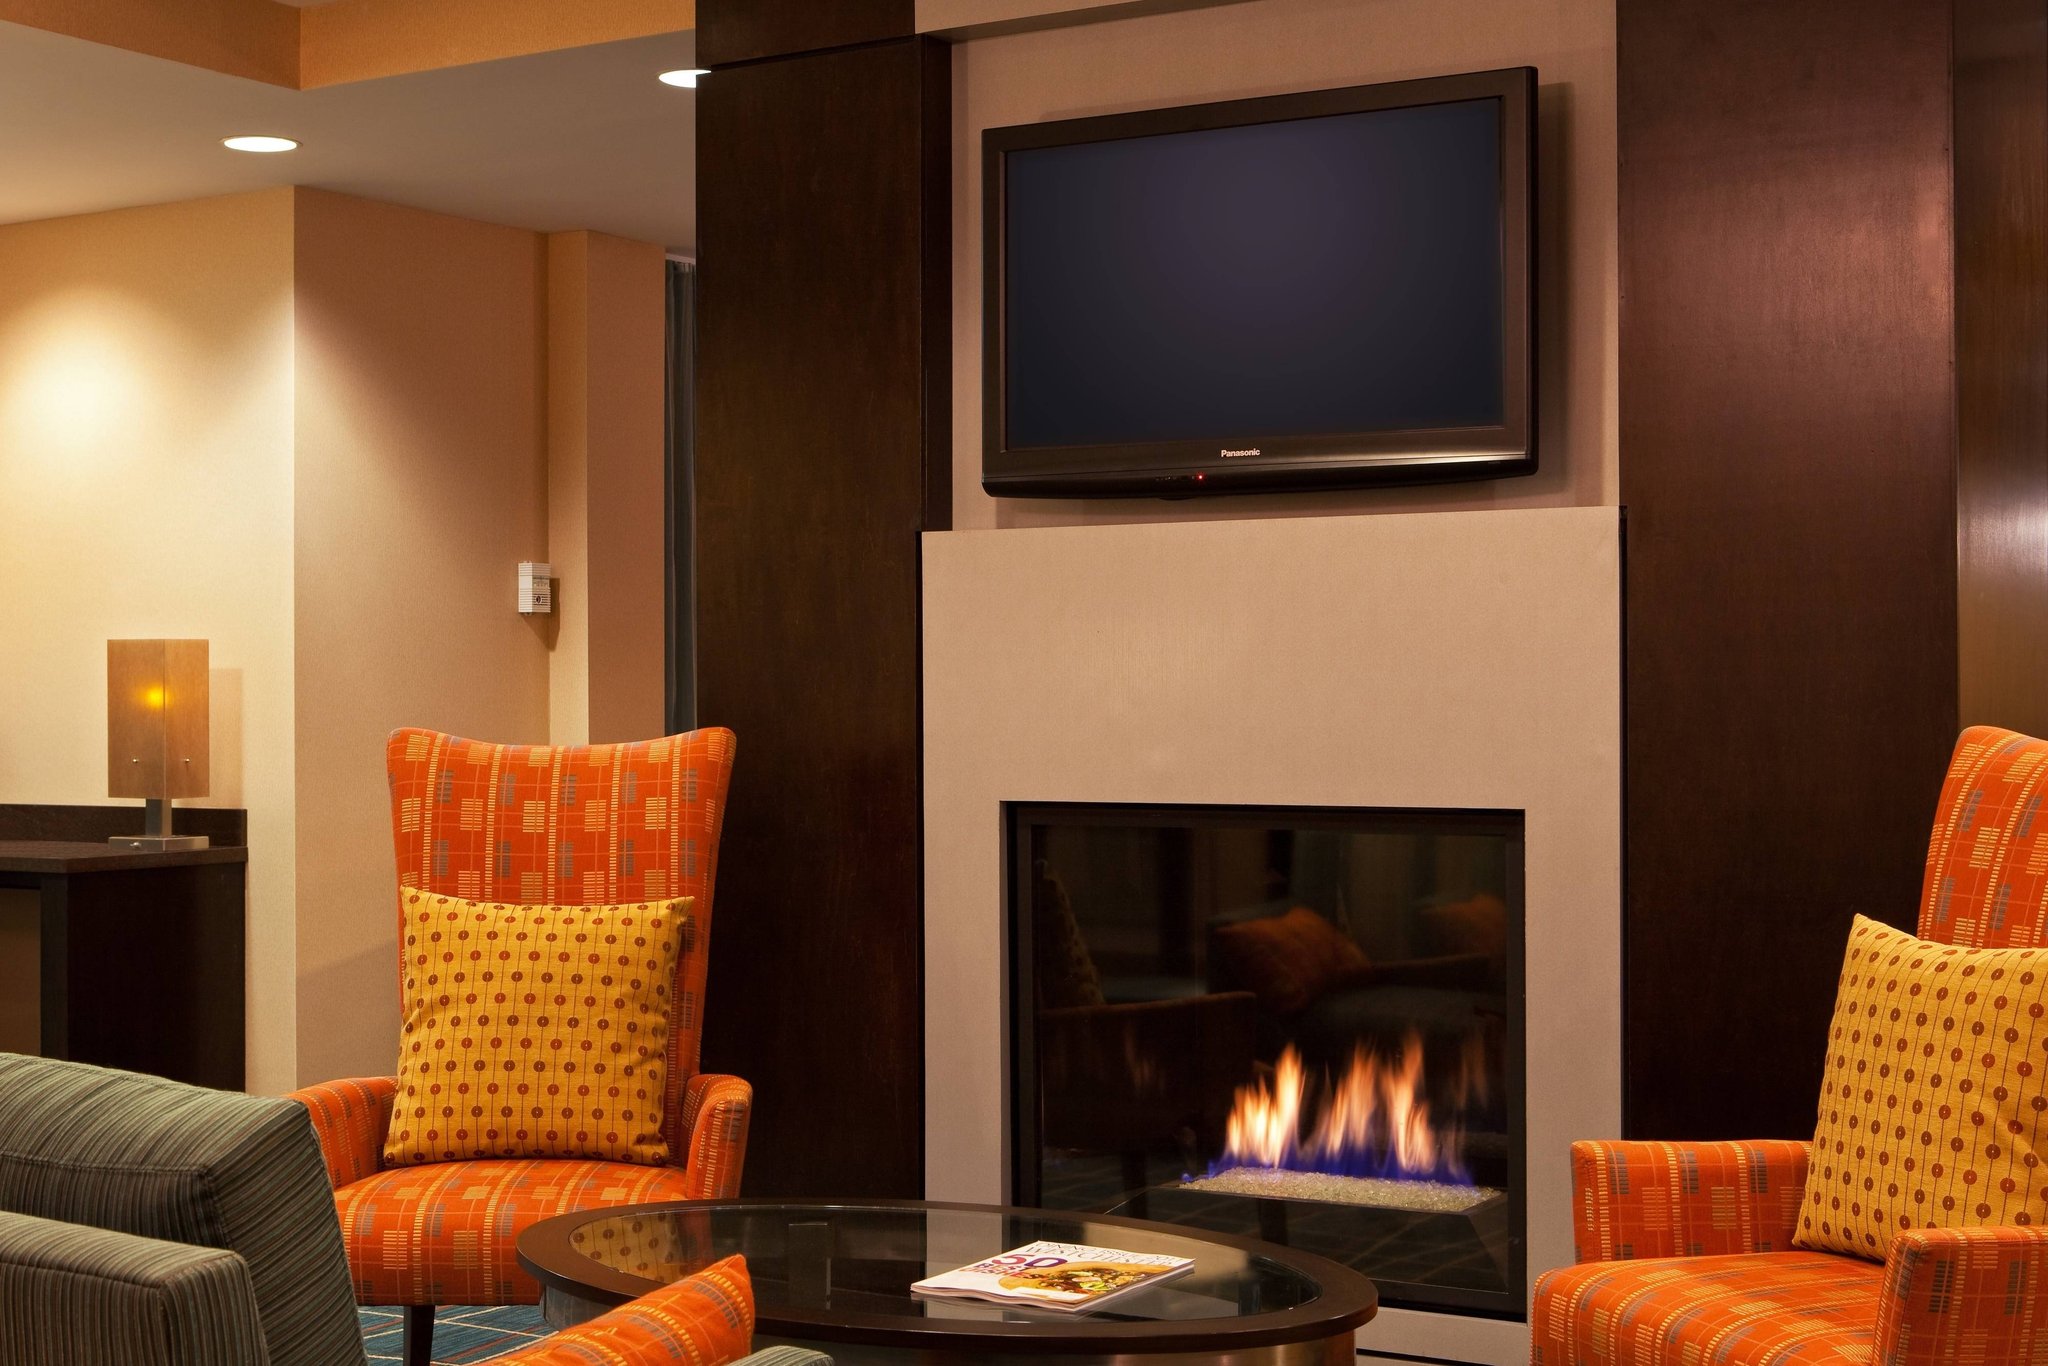 Springhill Suites Tarrytown Westchester County